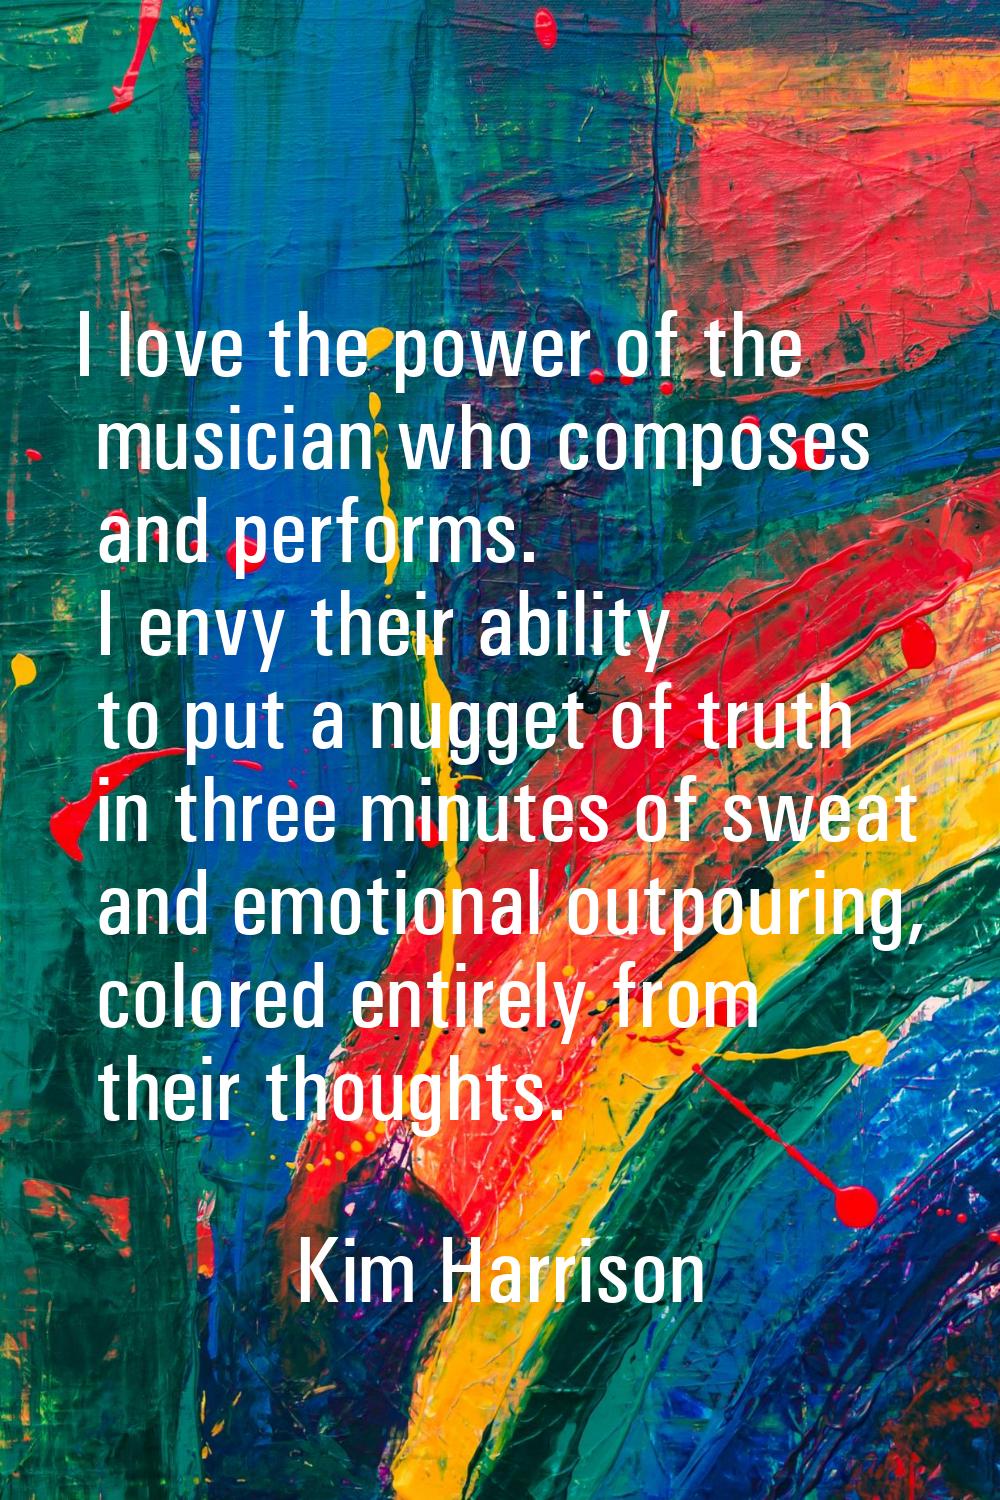 I love the power of the musician who composes and performs. I envy their ability to put a nugget of